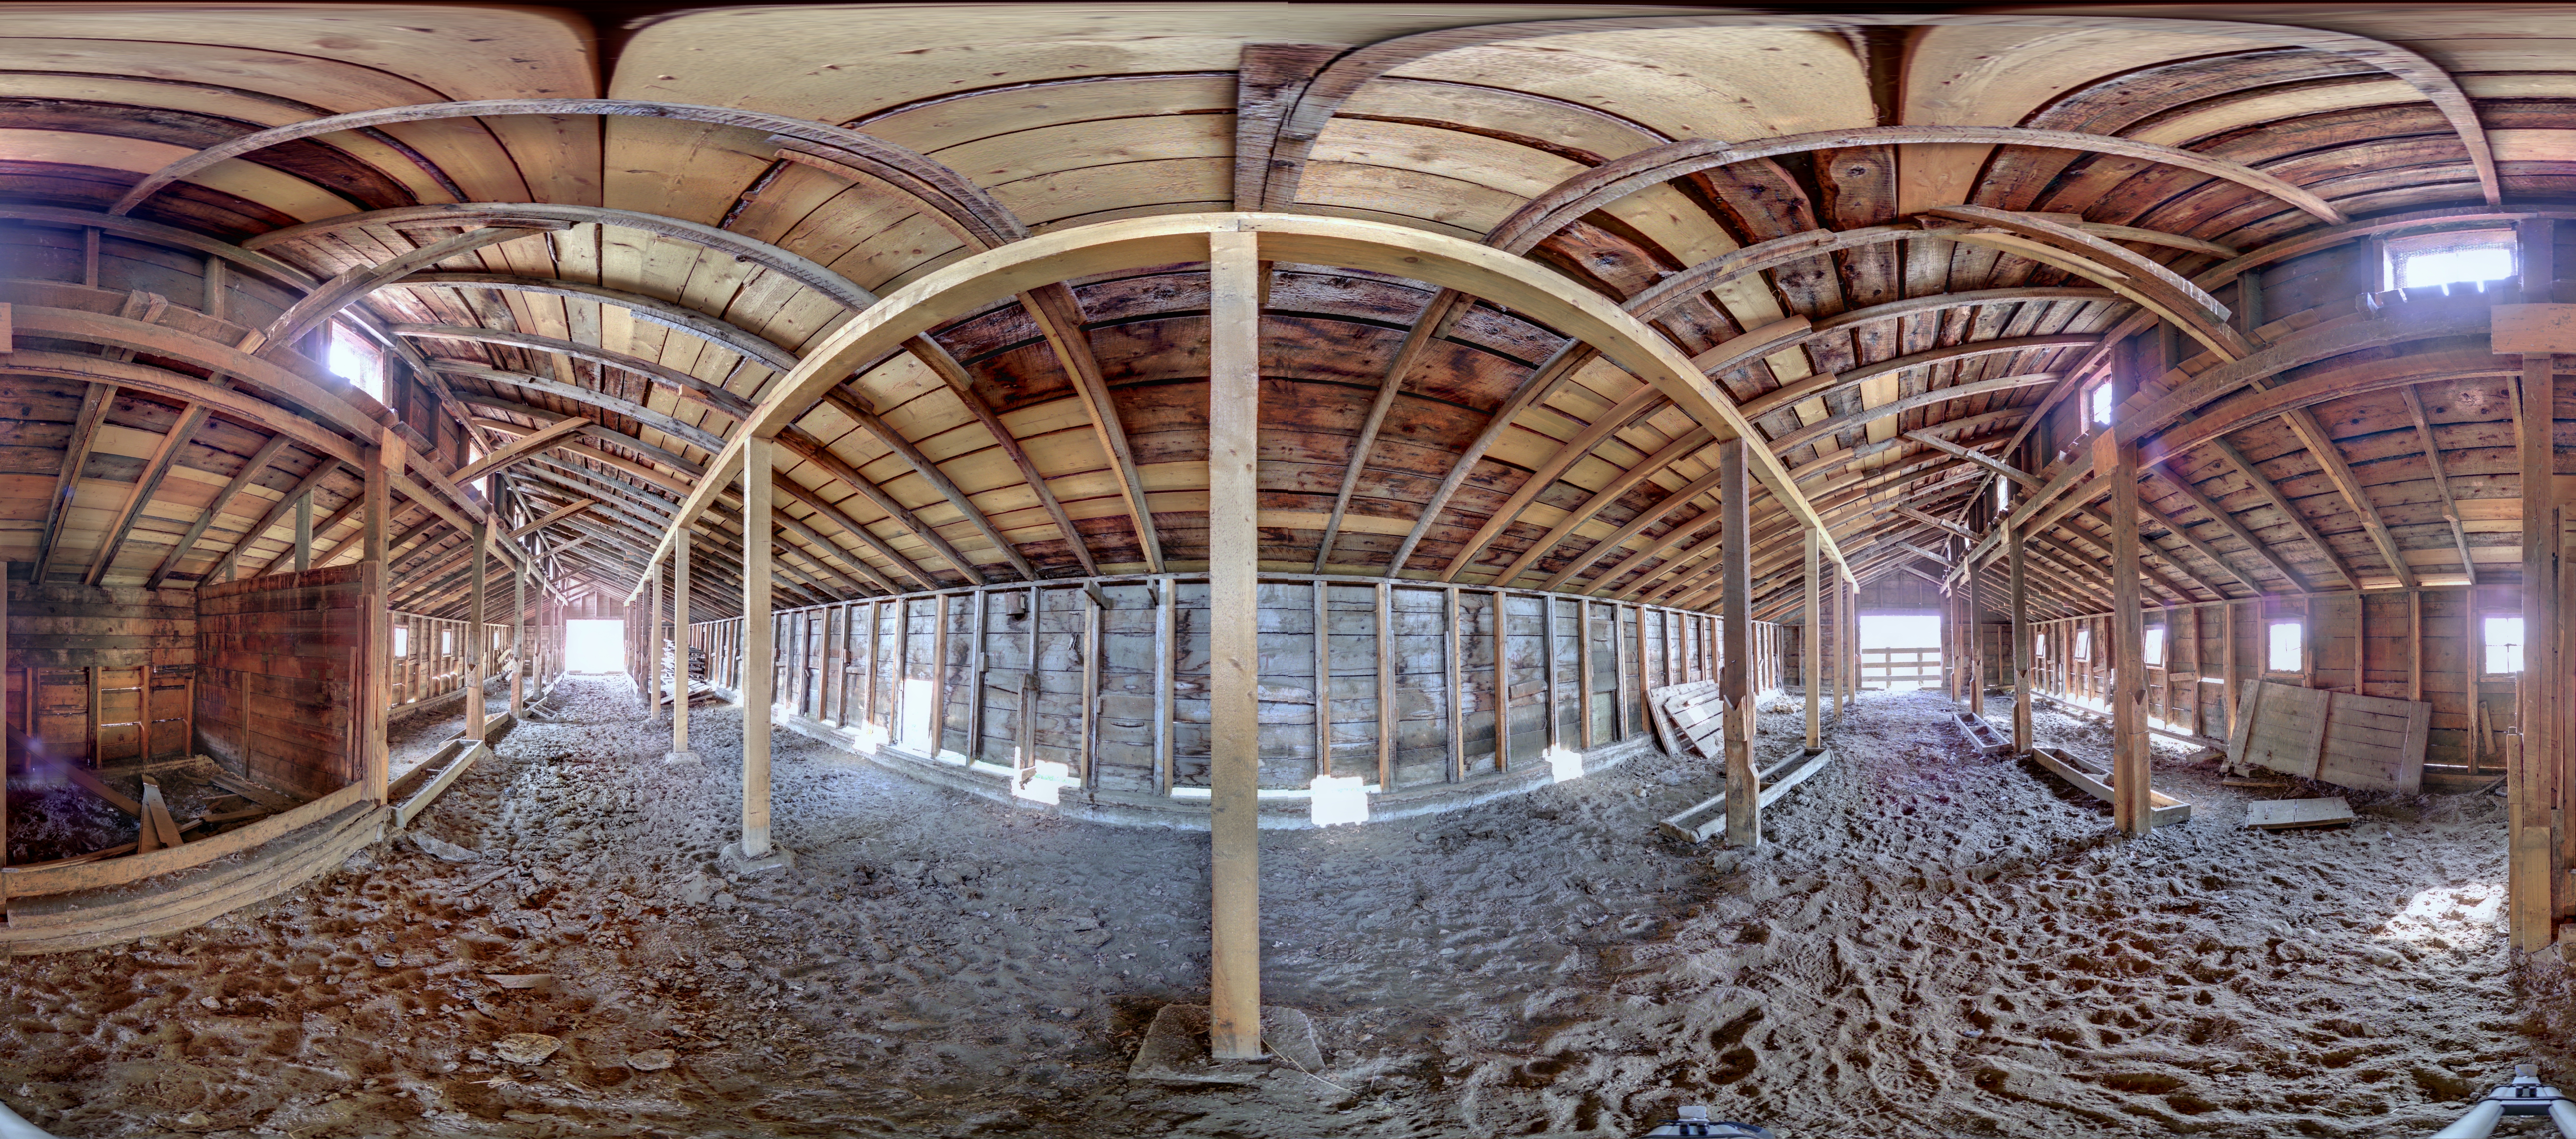 Panoramic image from scan location 9 of the exterior of the Piggery at Bar U Ranch